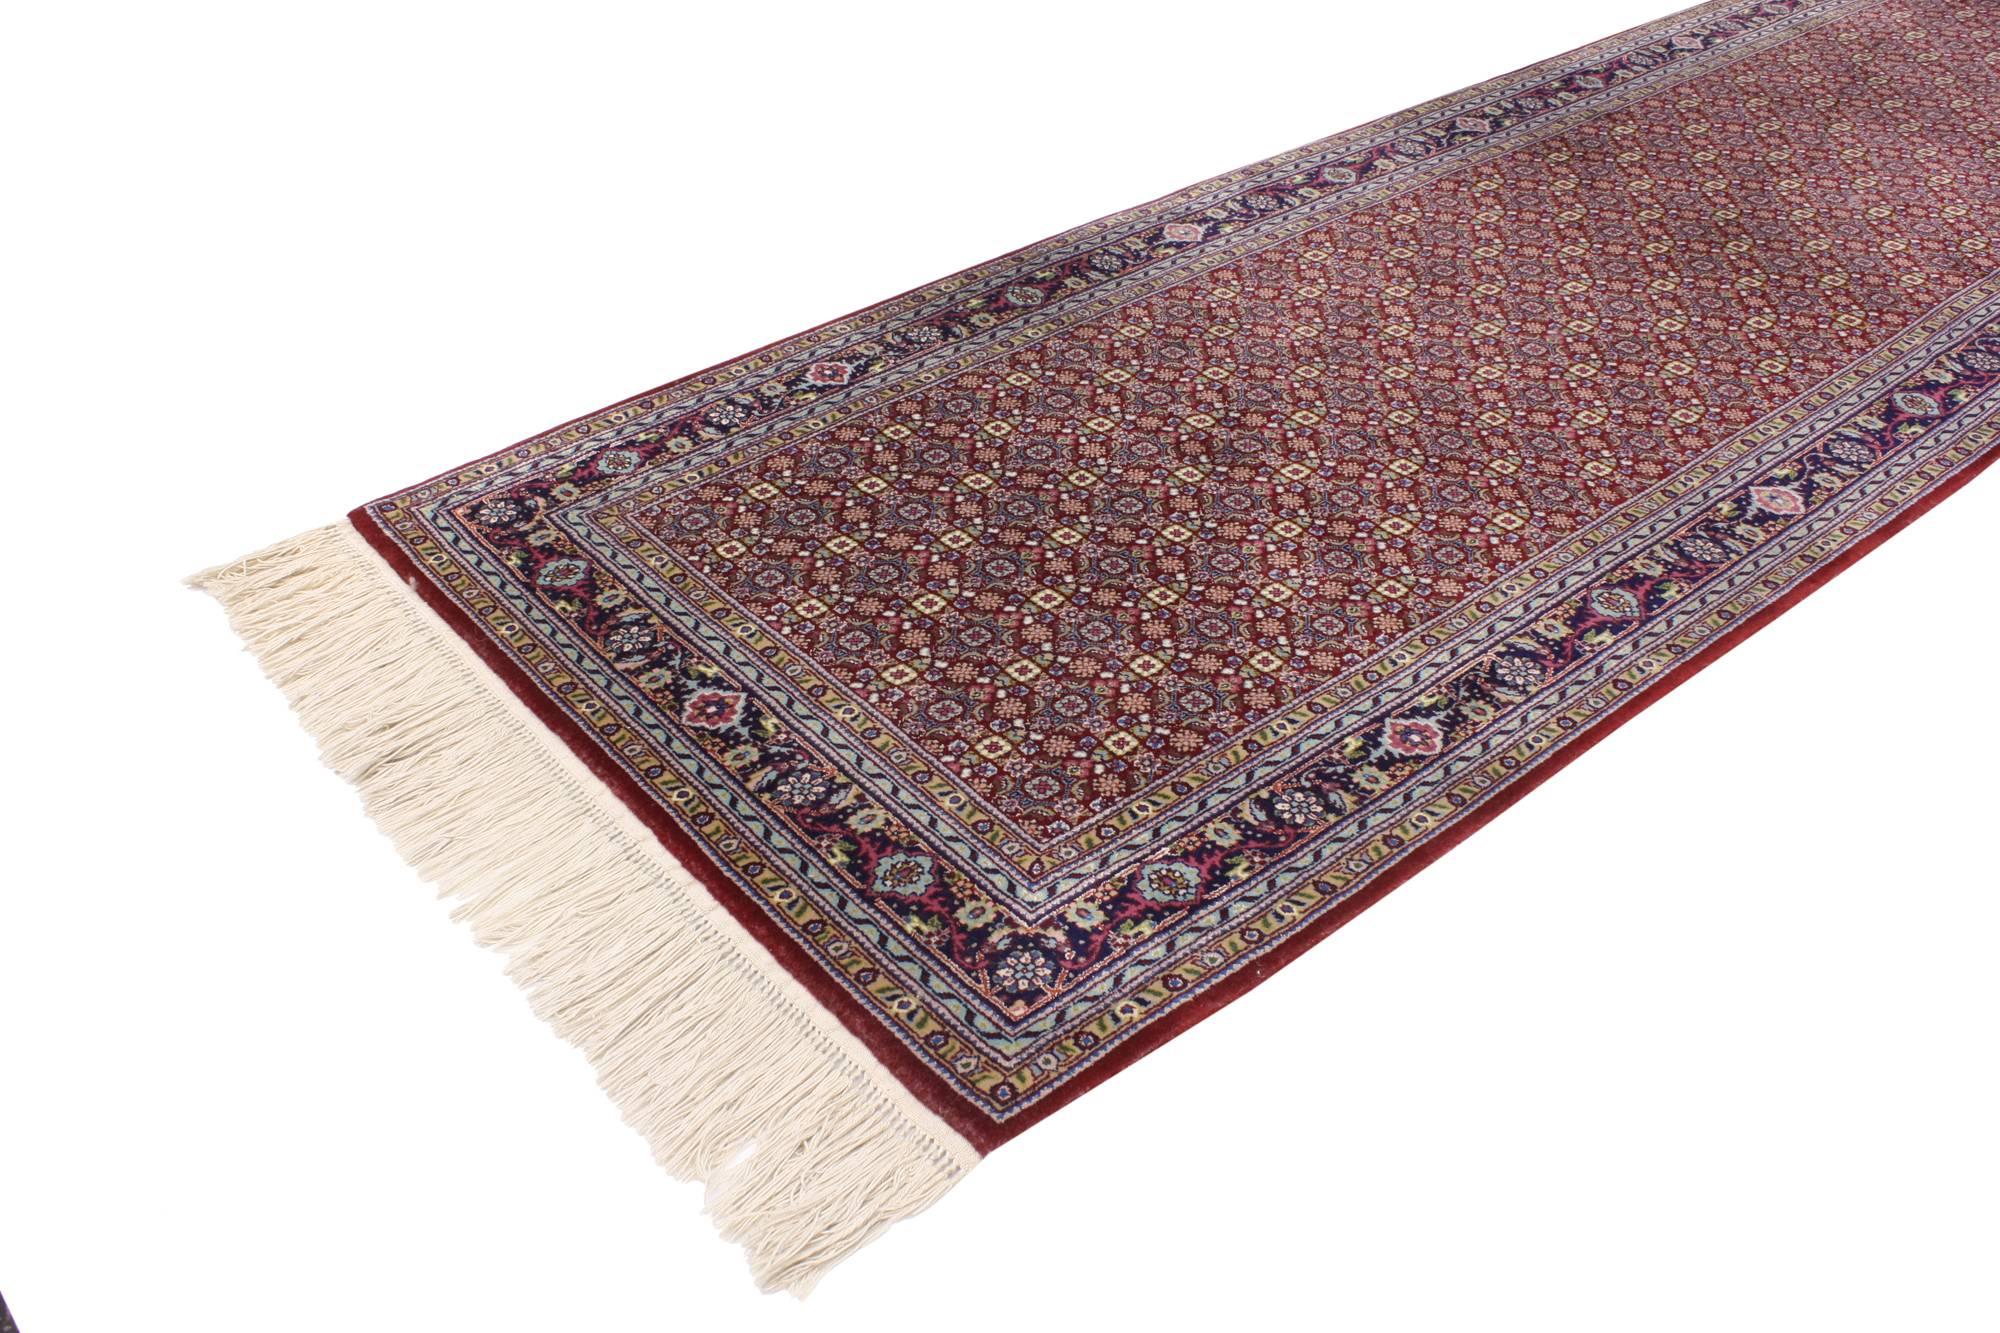 76868 Vintage Persian Style Hallway Runner with Tabriz Design. This hand-knotted wool vintage Persian style carpet runner displays a traditional Tabriz design. The entirety of the field is covered with an allover Mina Khani motif pattern combined